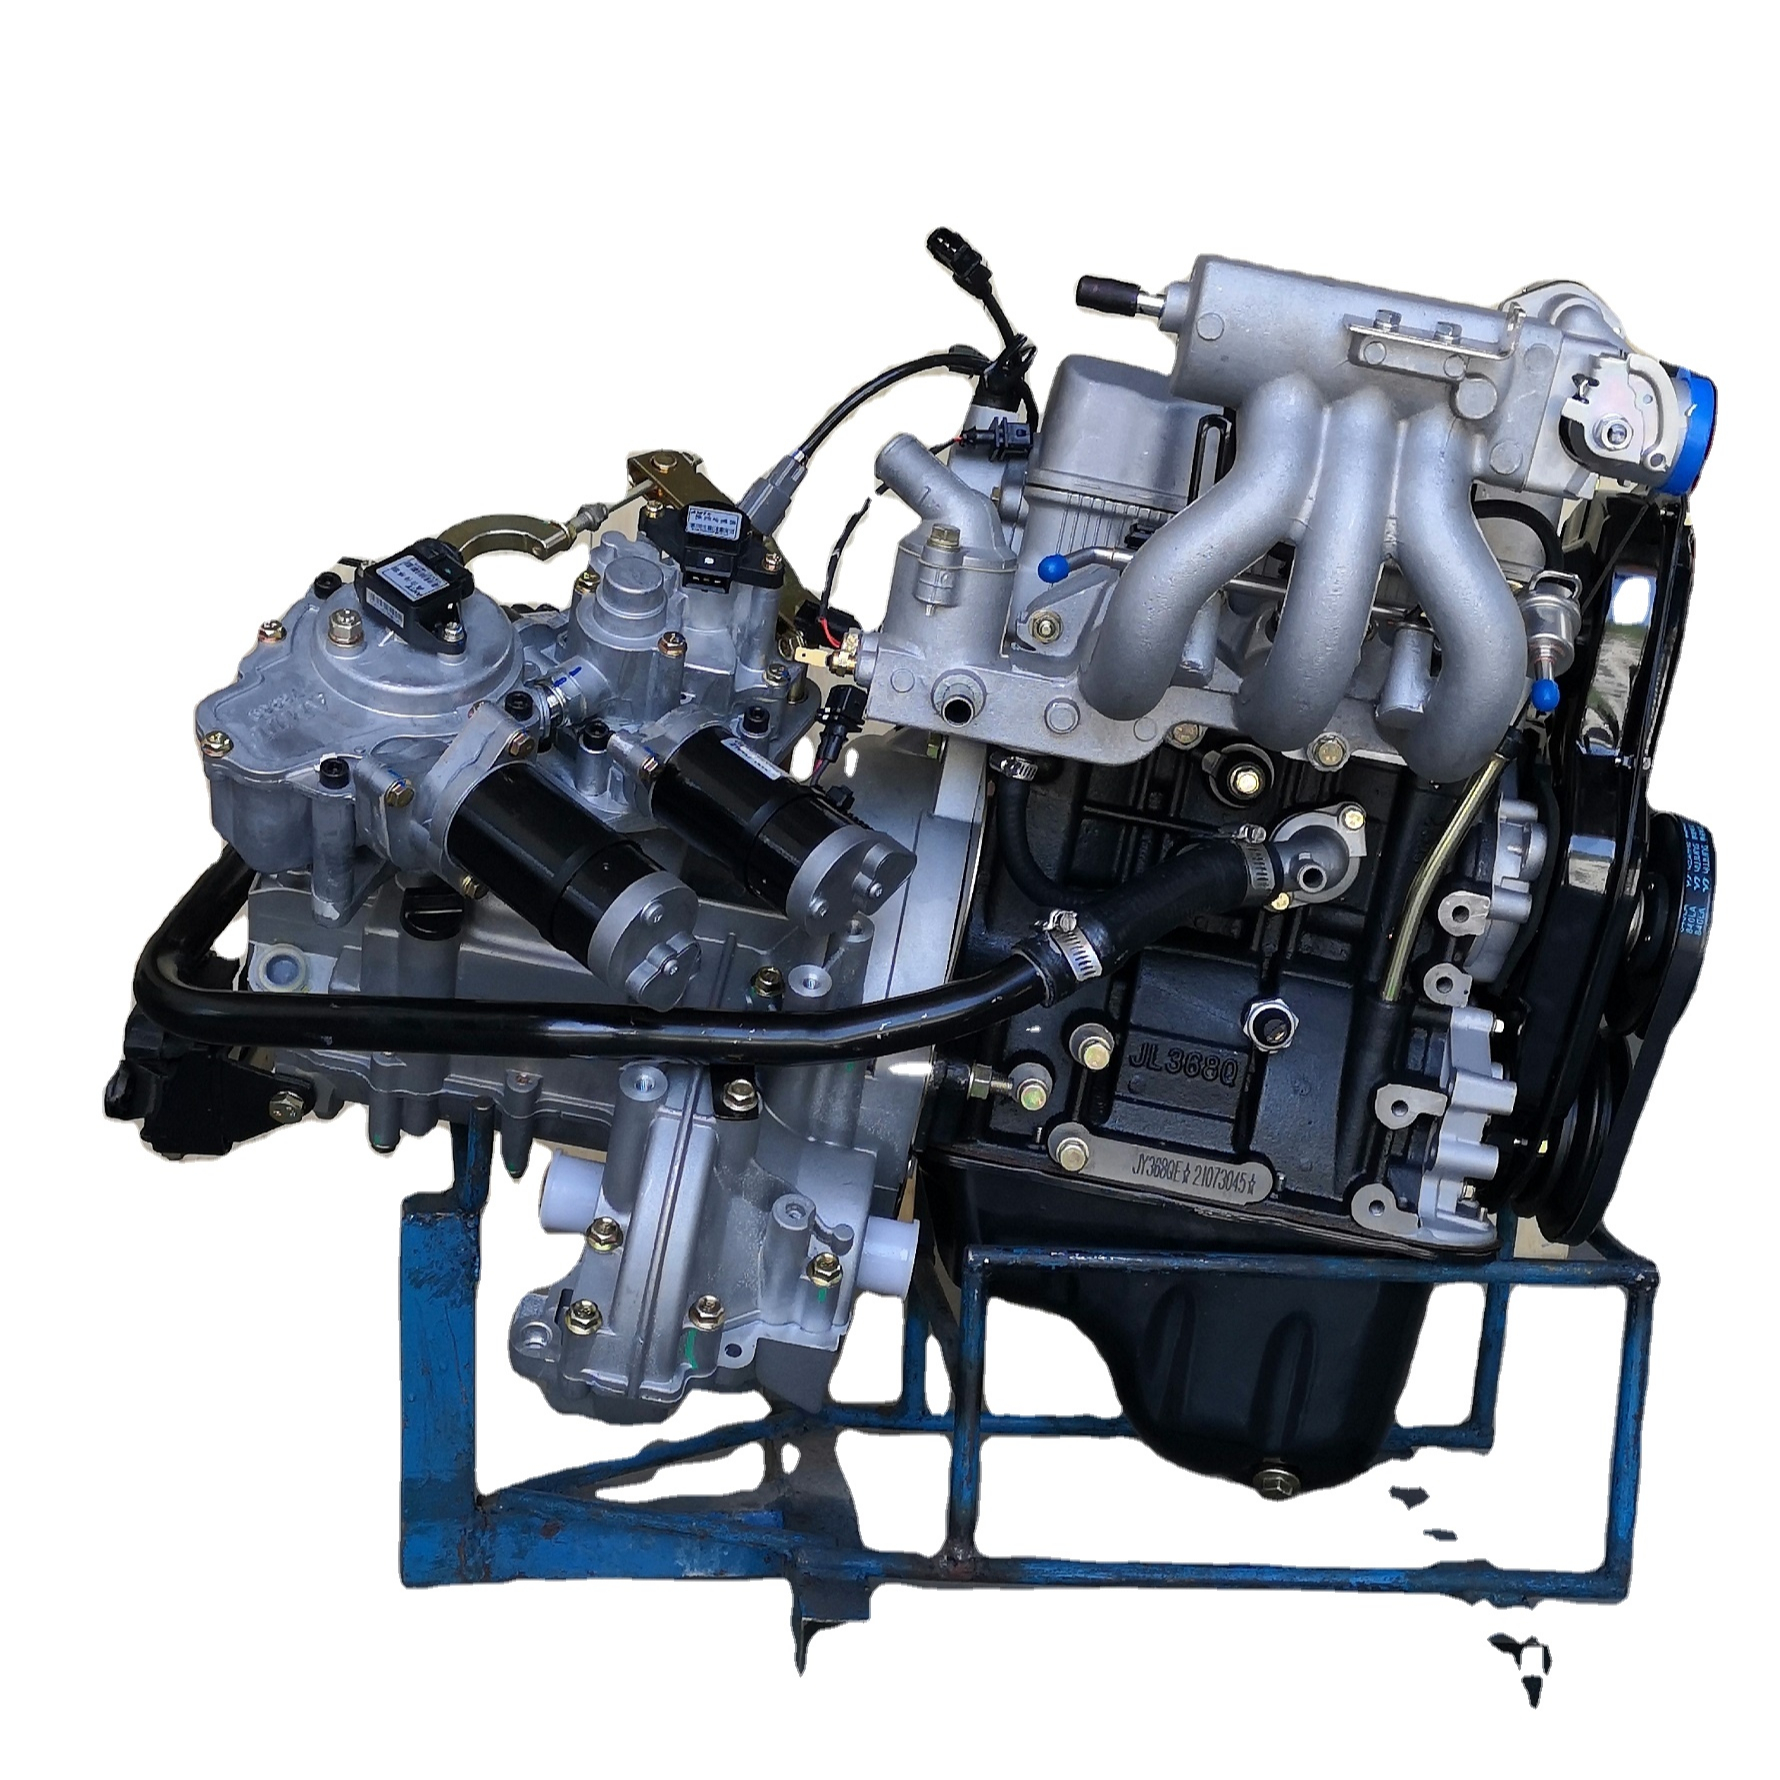 DAYANG factory sale Motor cargo tricycle automobile Car Engine Brand New Auto Engine parts gasoline 800cc power